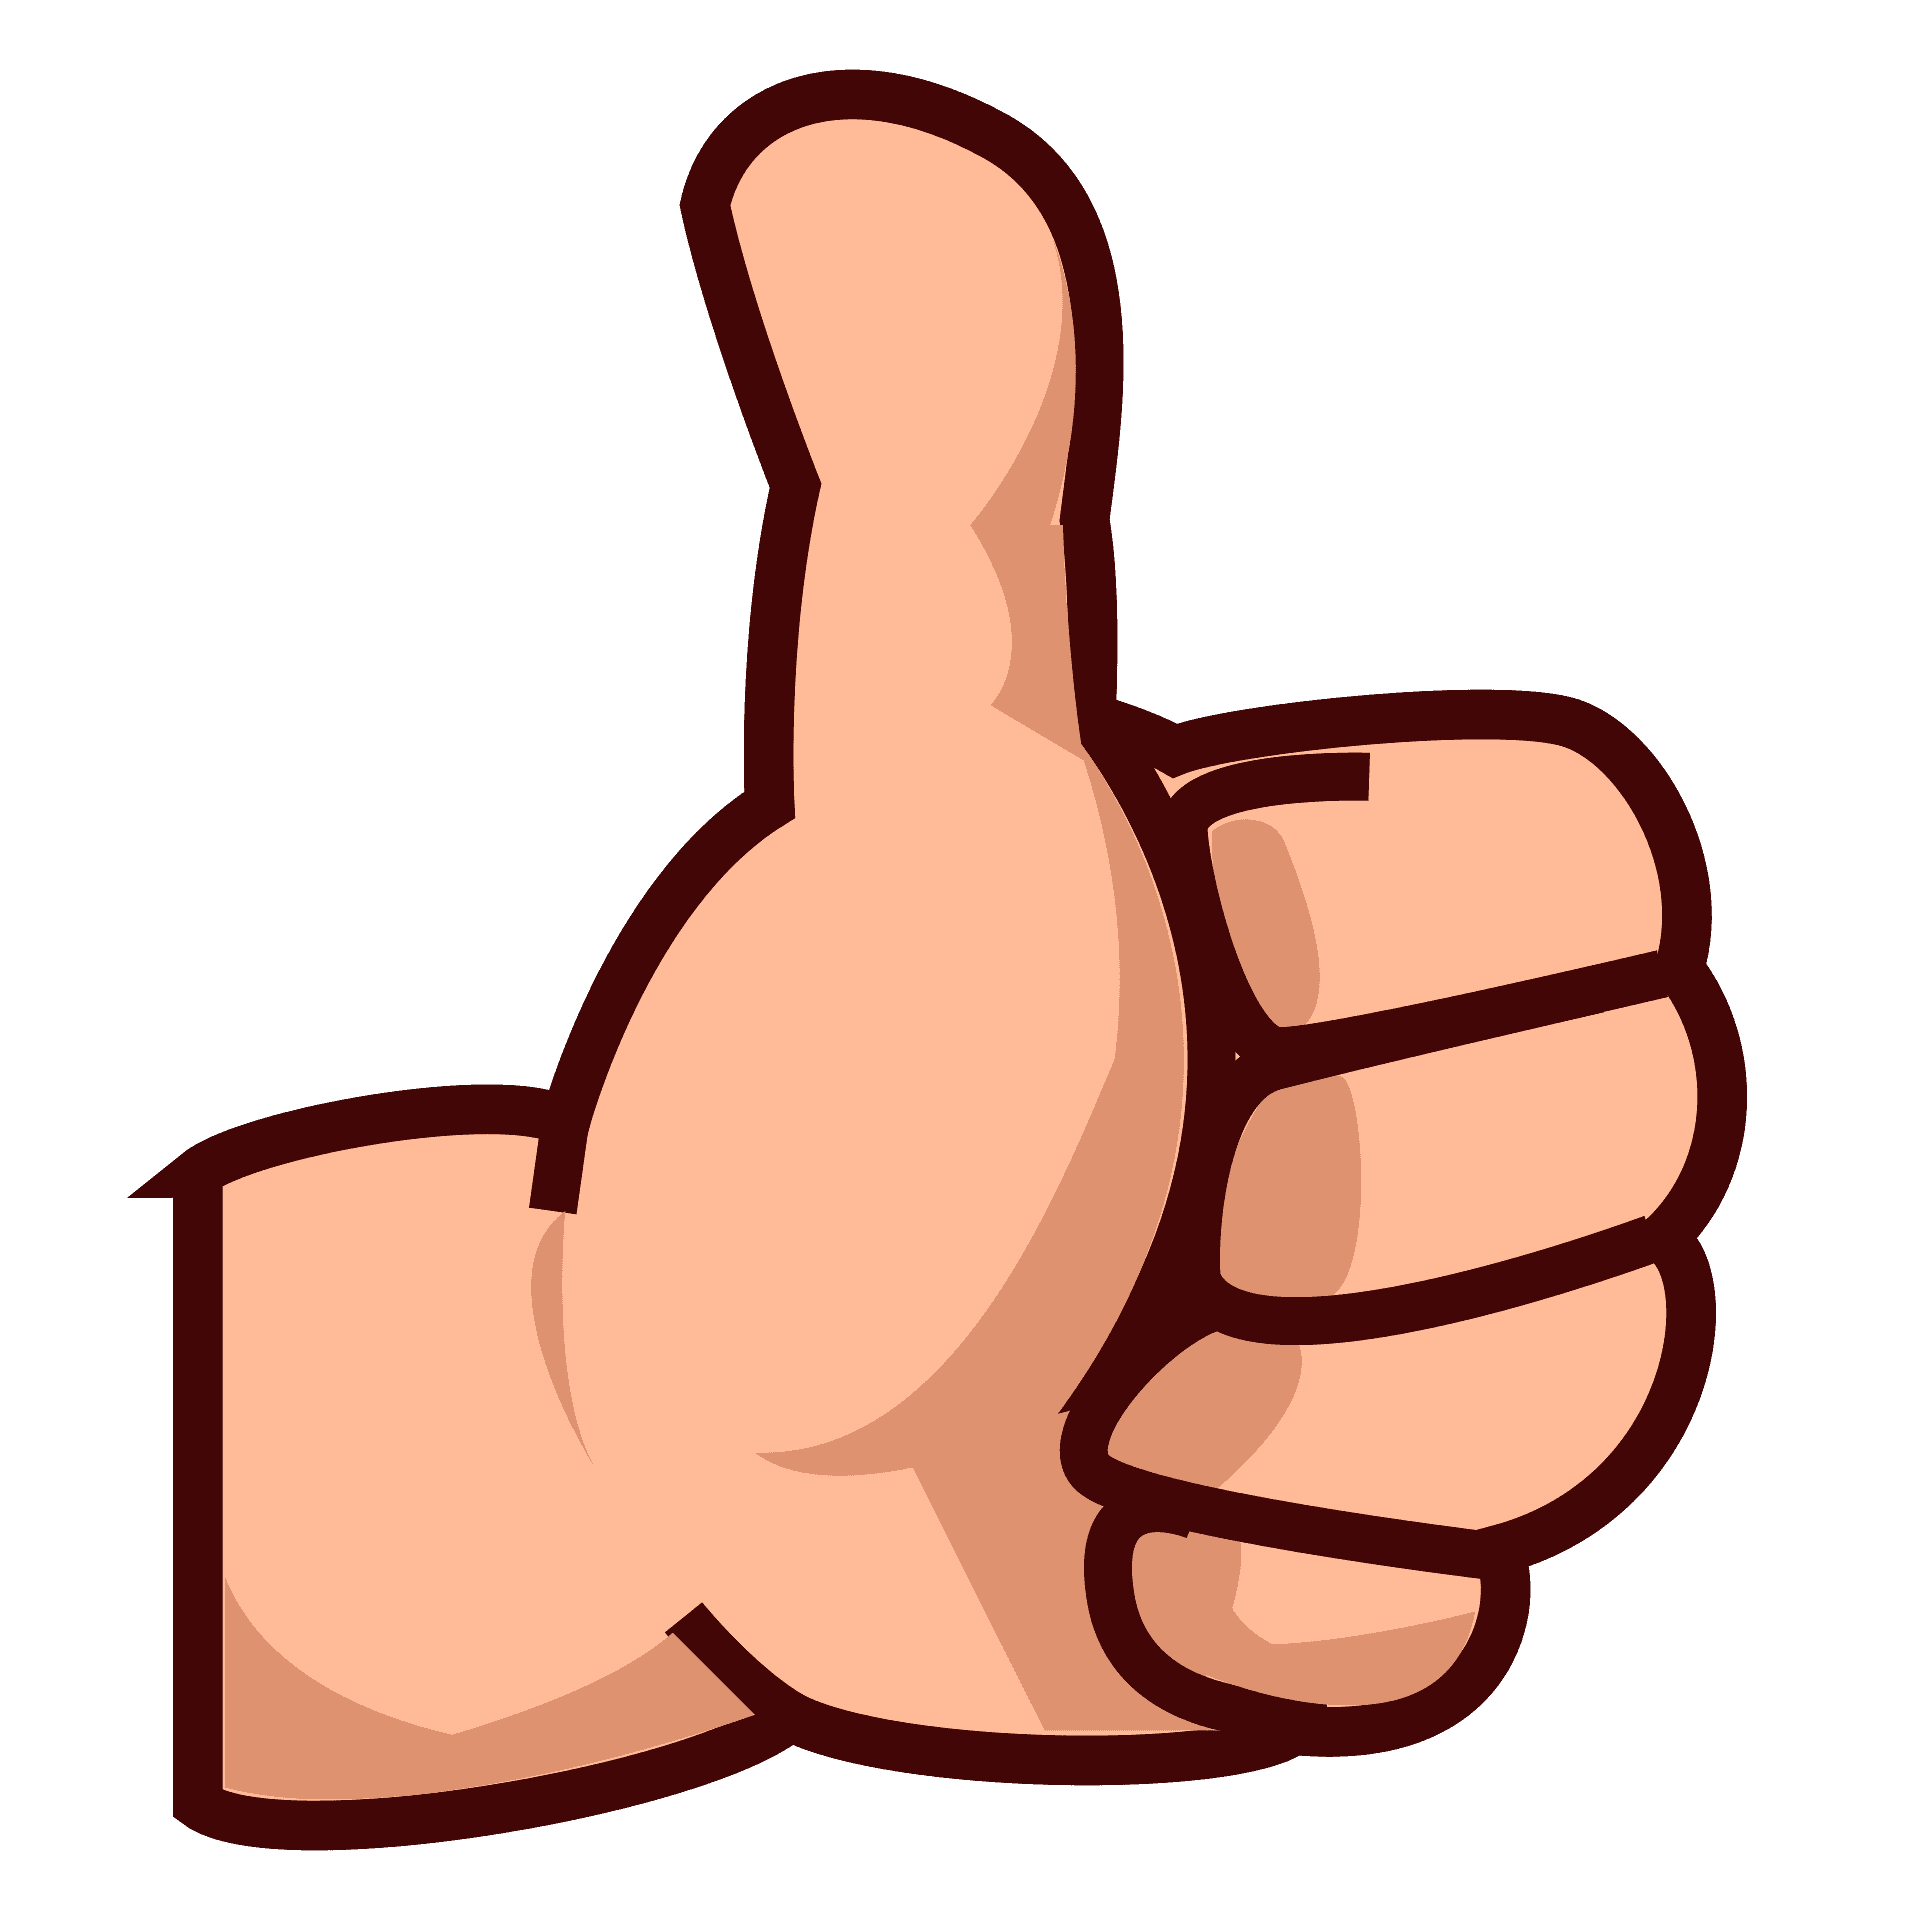 Thumbs Up Emoji PNG Transparent Images - PNG All